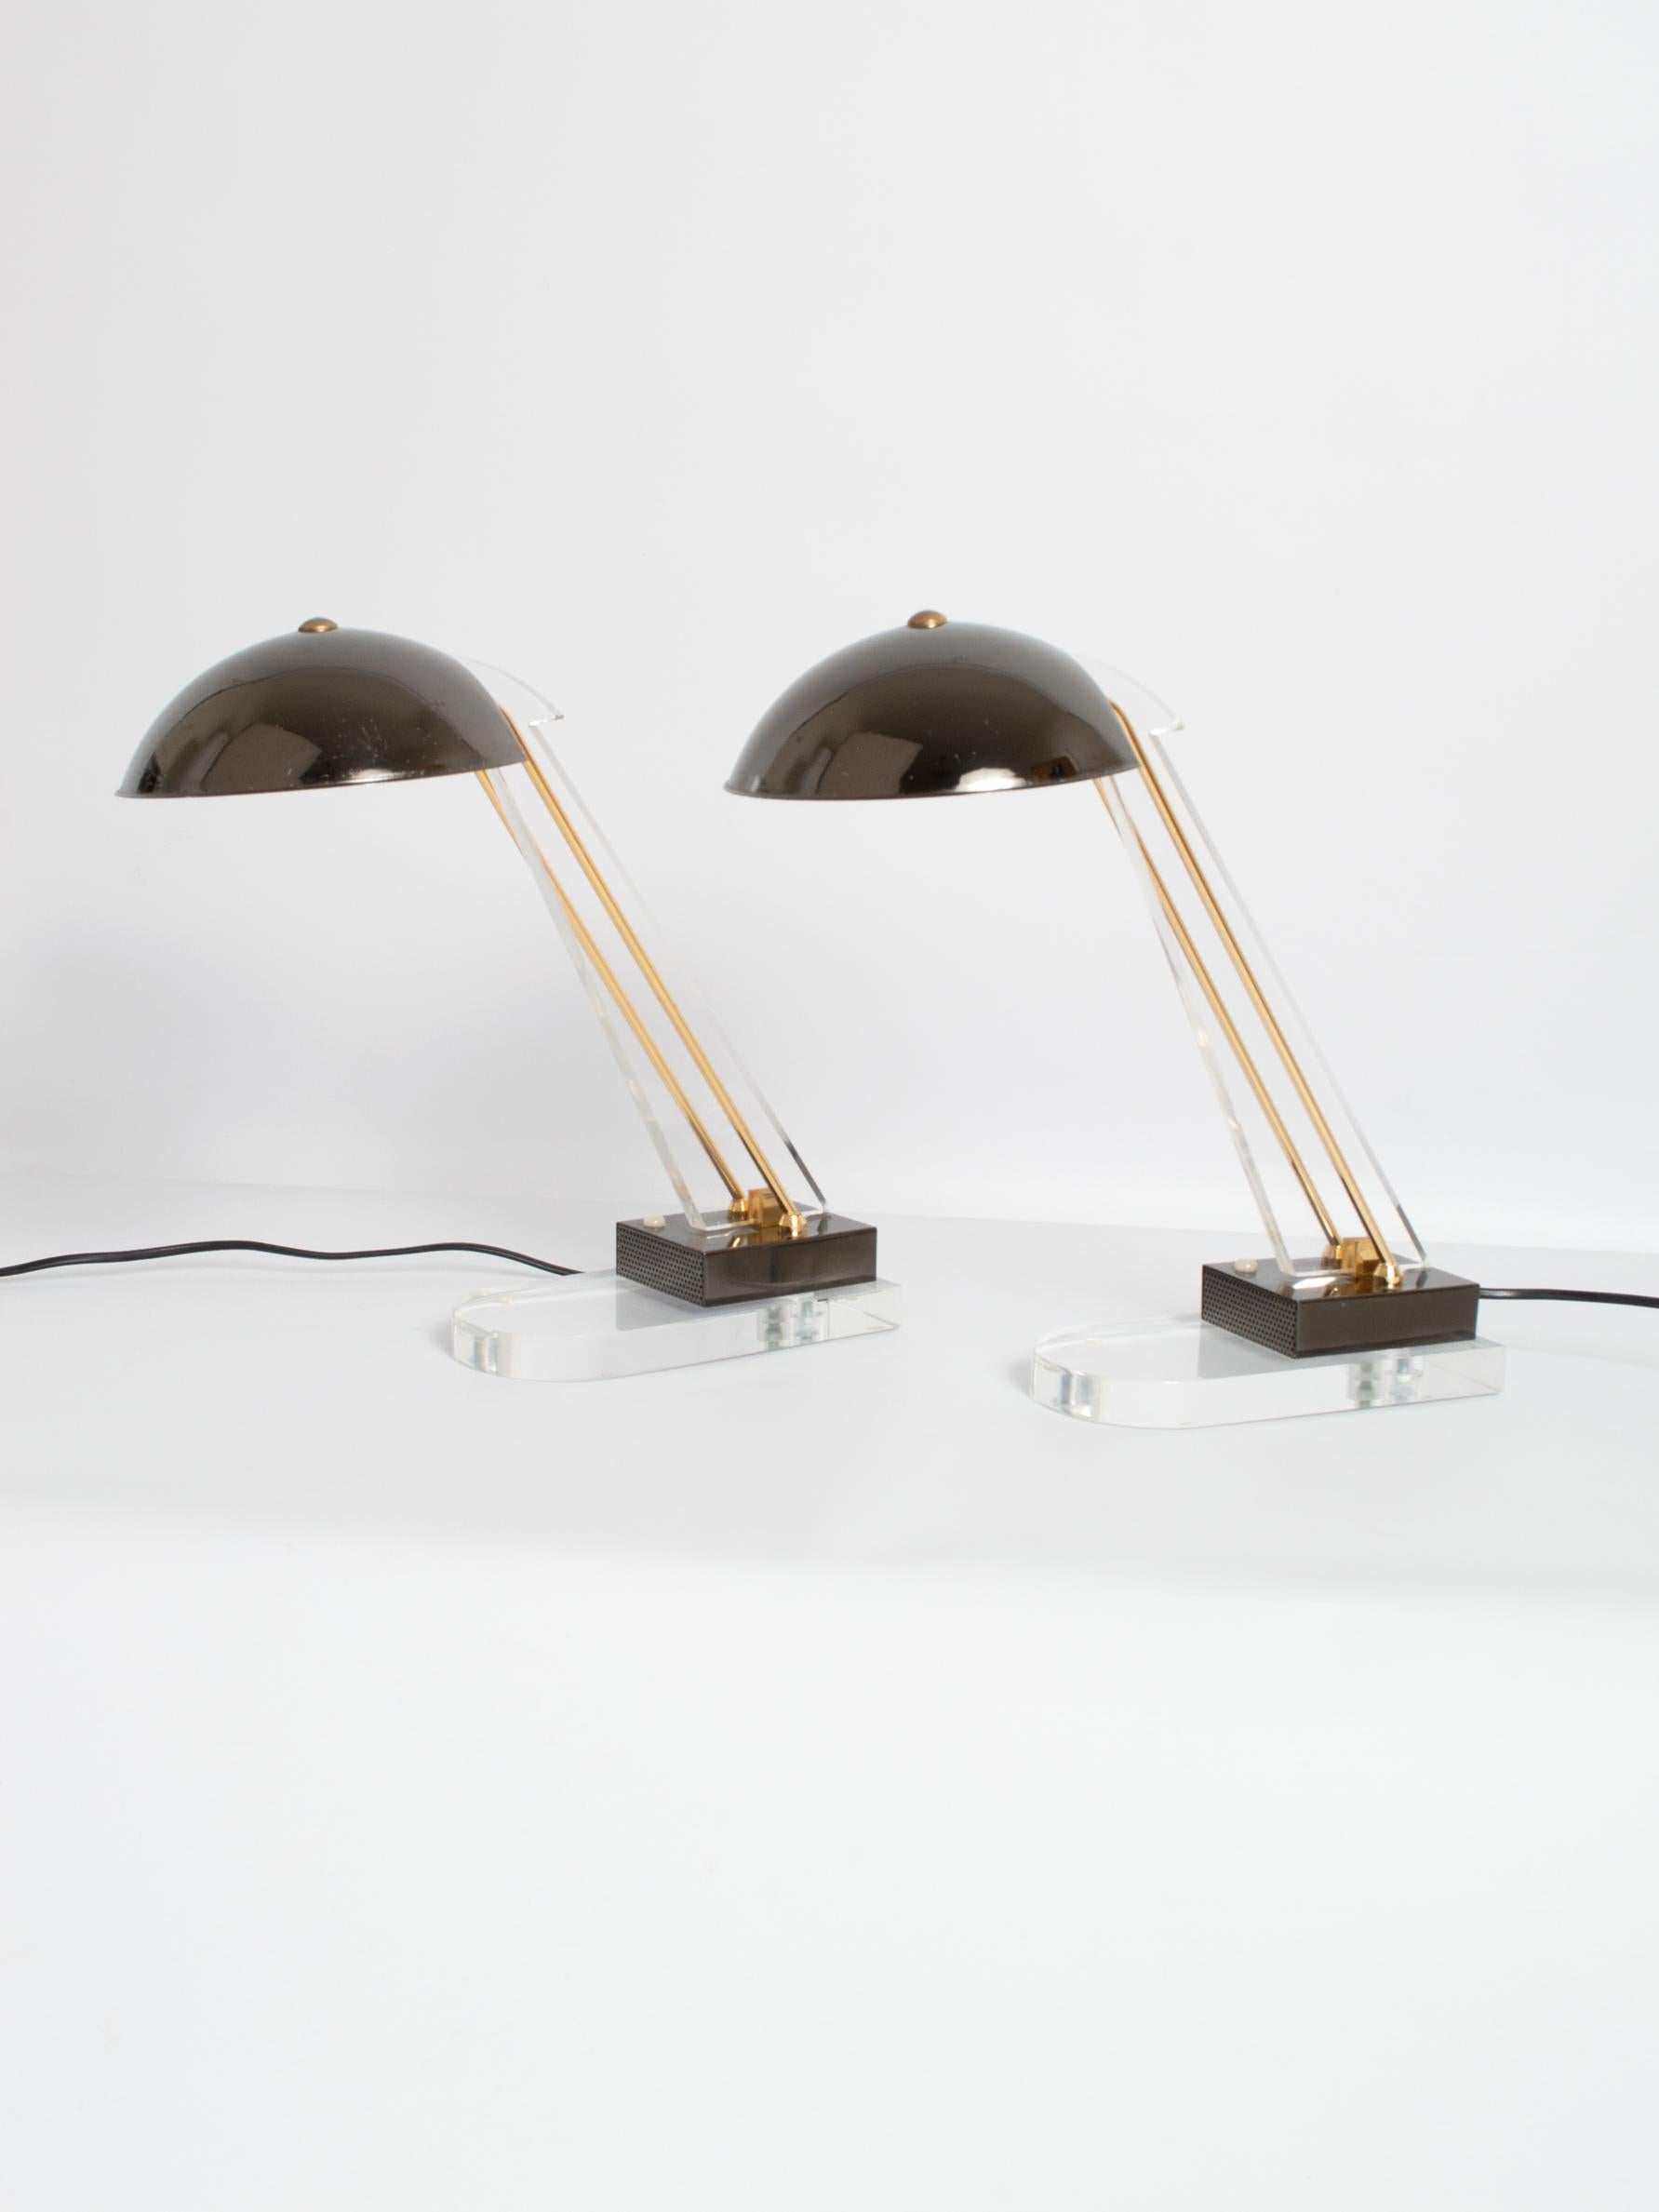 A pair of Italian midcentury Lucite and brass desk lamps by Angelo Lelii for Arredoluce, Italy, circa 1950.

In very good vintage condition, with expected signs of patination to the metalware.